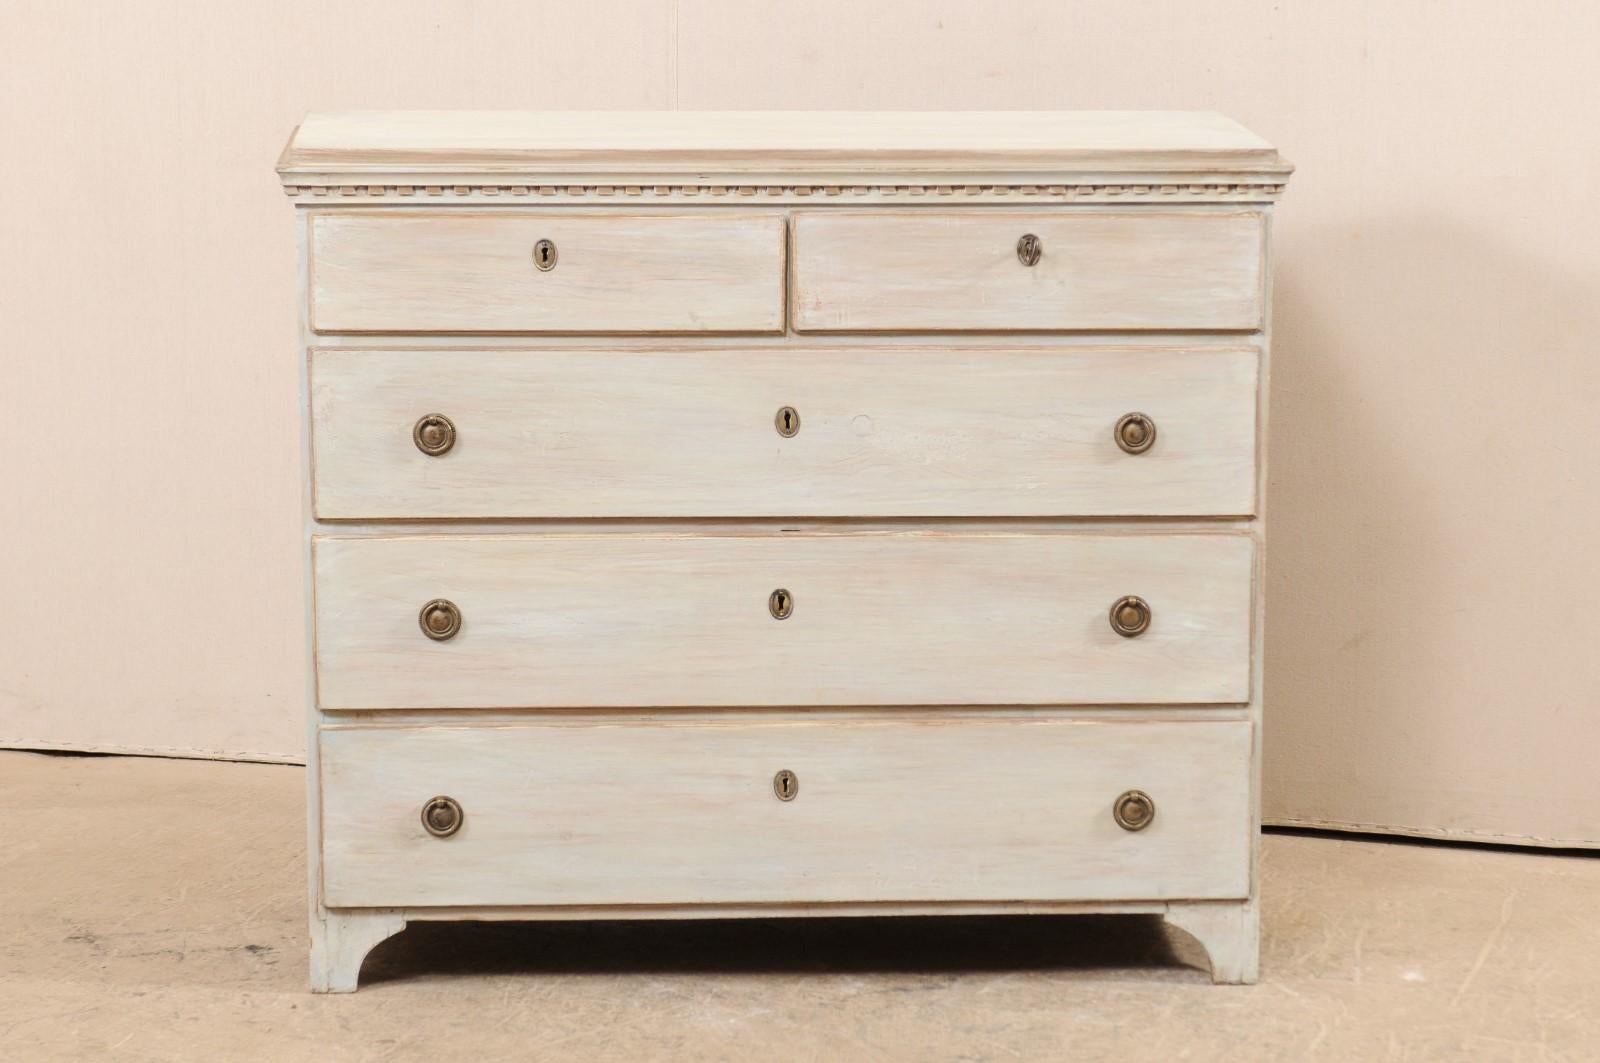 A Swedish chest of five dovetailed-drawers from the 1820s, just after the Gustavian period. This Swedish antique chest features clean, simple lines with lovely dentil trim just beneath the top ledge, and raised up on bracket feet. There are two